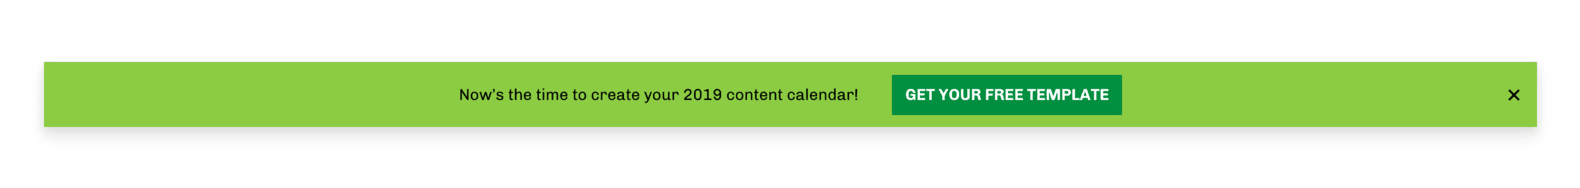 Alert bar: Now's the time to create your 2018 content calendar! Get your free template >